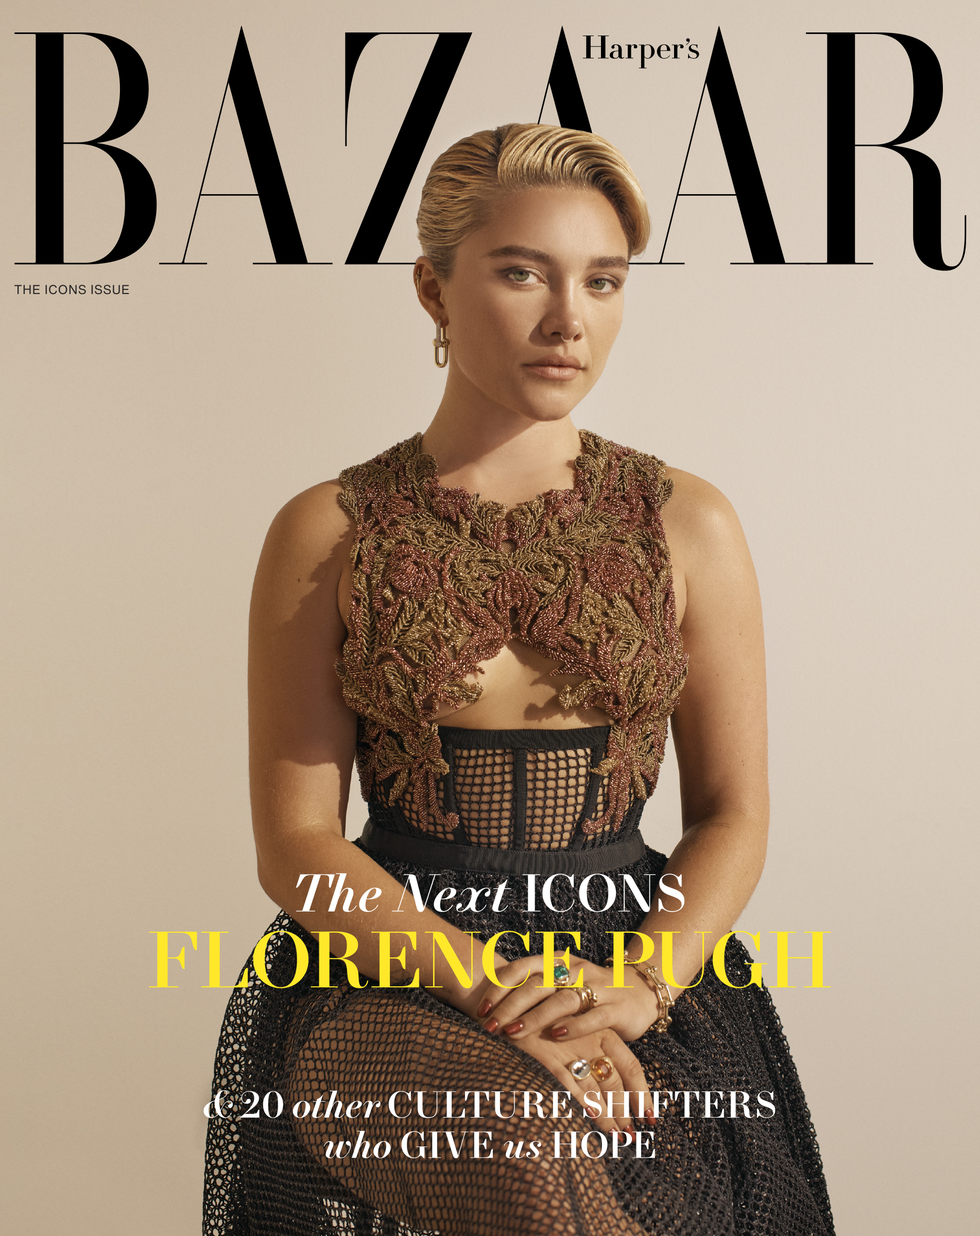 Big Bazaar Sex - Florence Pugh on Don't Worry Darling and Life in the Spotlight